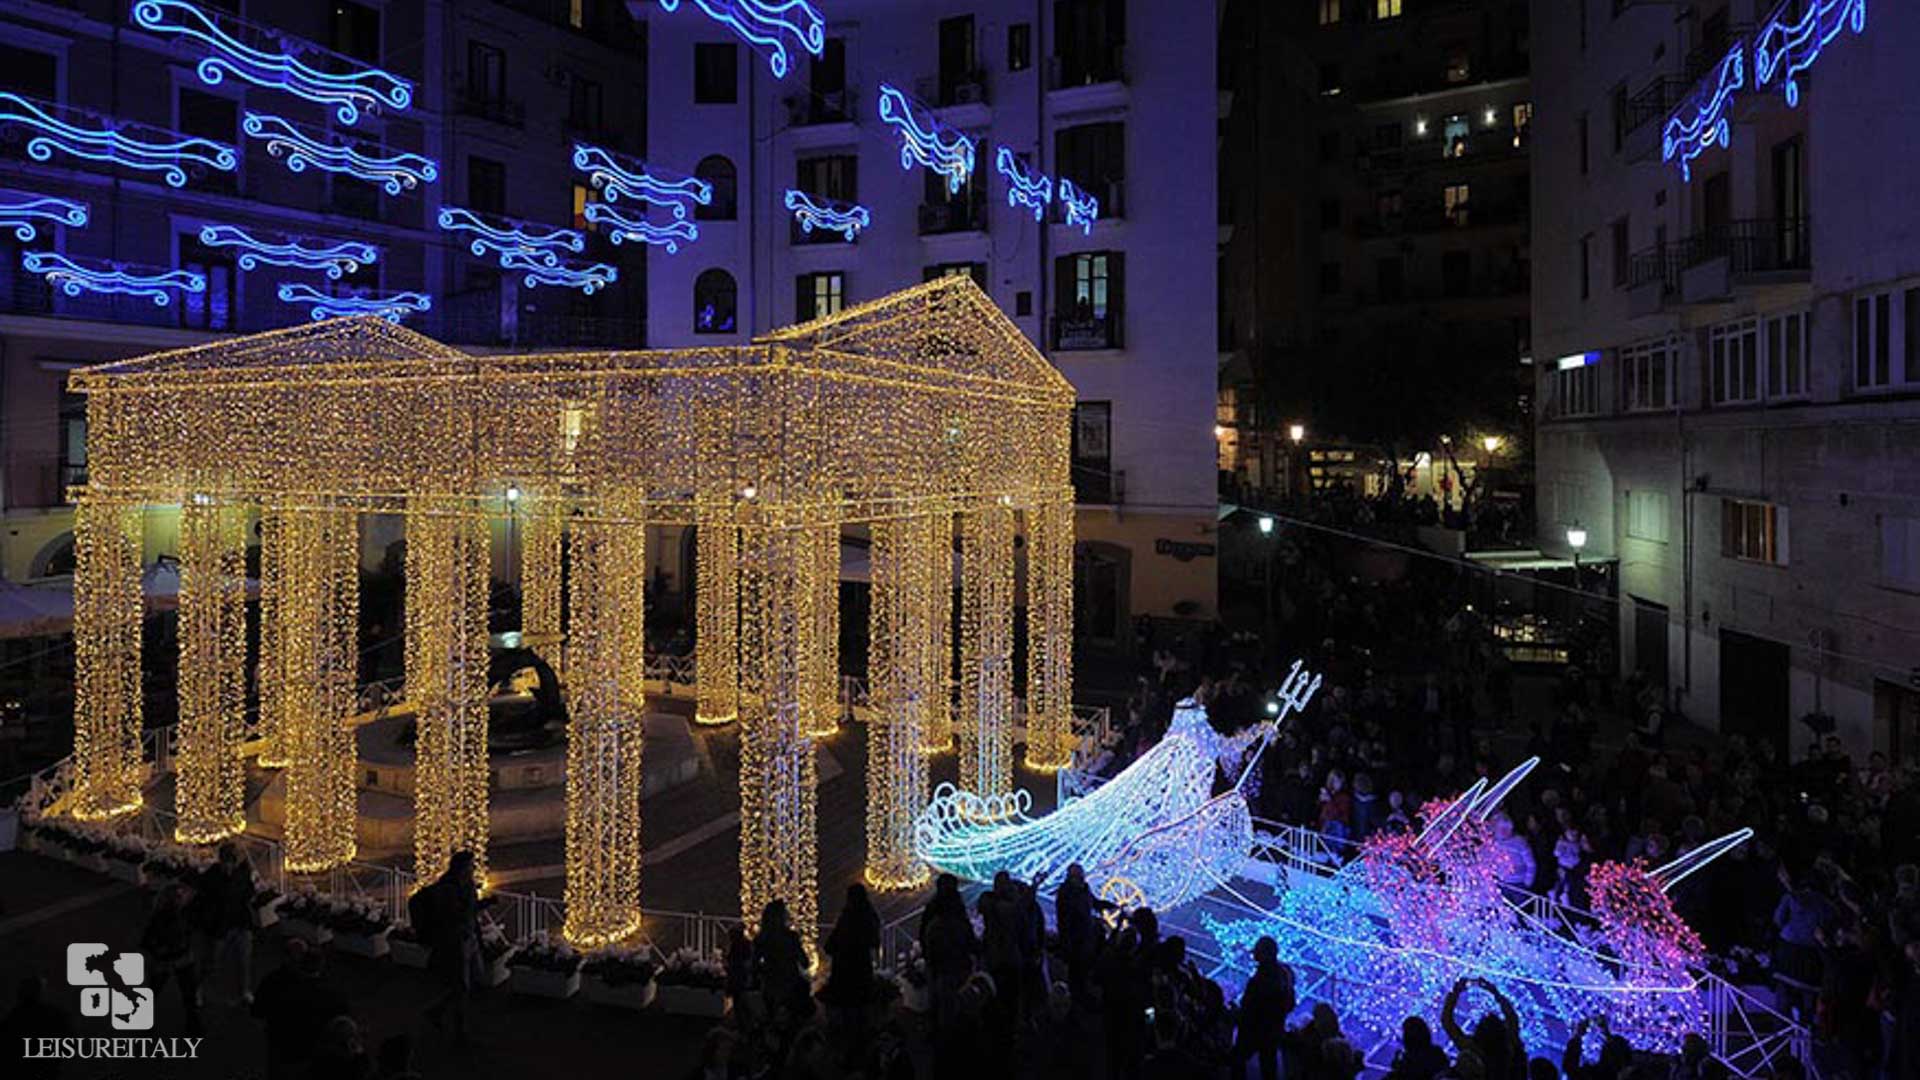 One of the installations of Salerno Christmas Lights